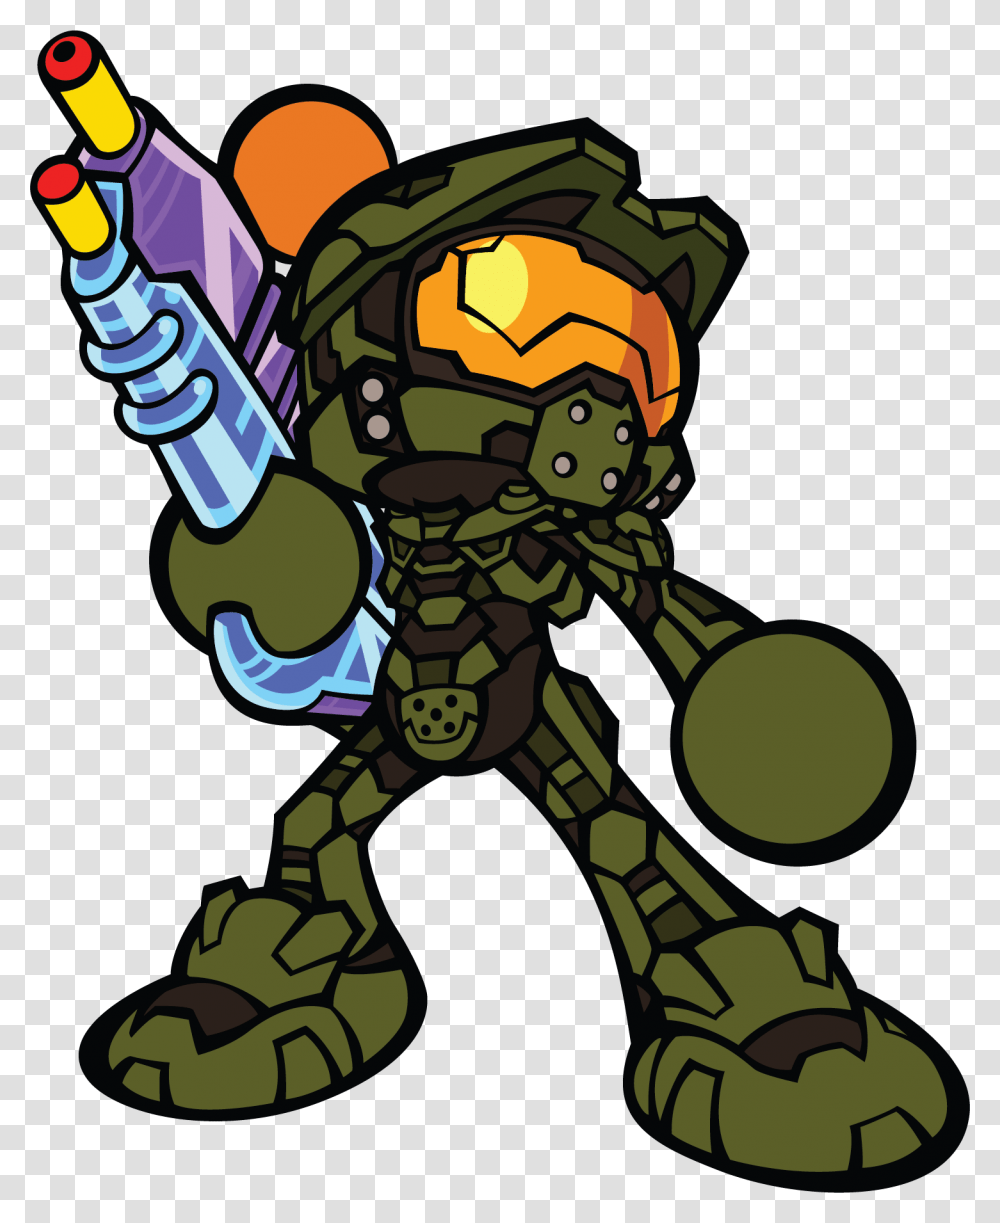 Halo 4 Master Chief Drawing Super Bomberman R Characters Transparent Png